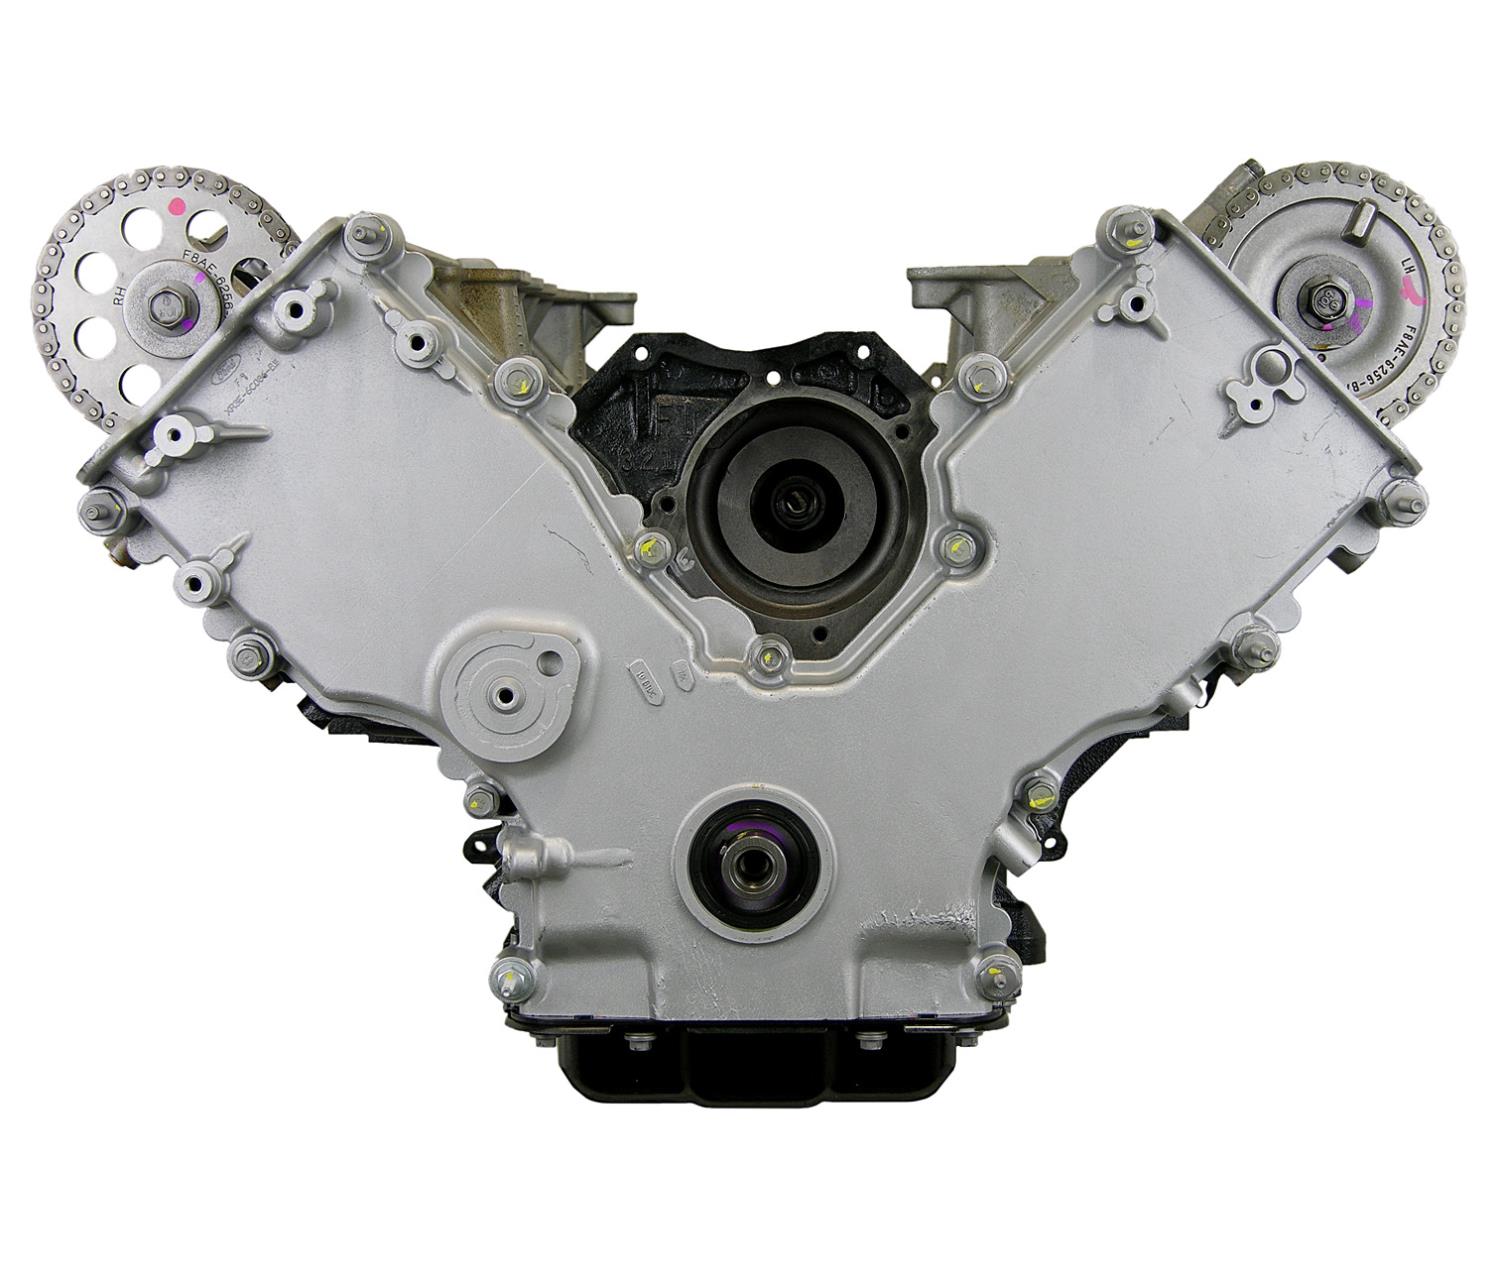 DFAE Remanufactured Crate Engine for 2001 Ford Mustang with 4.6L V8